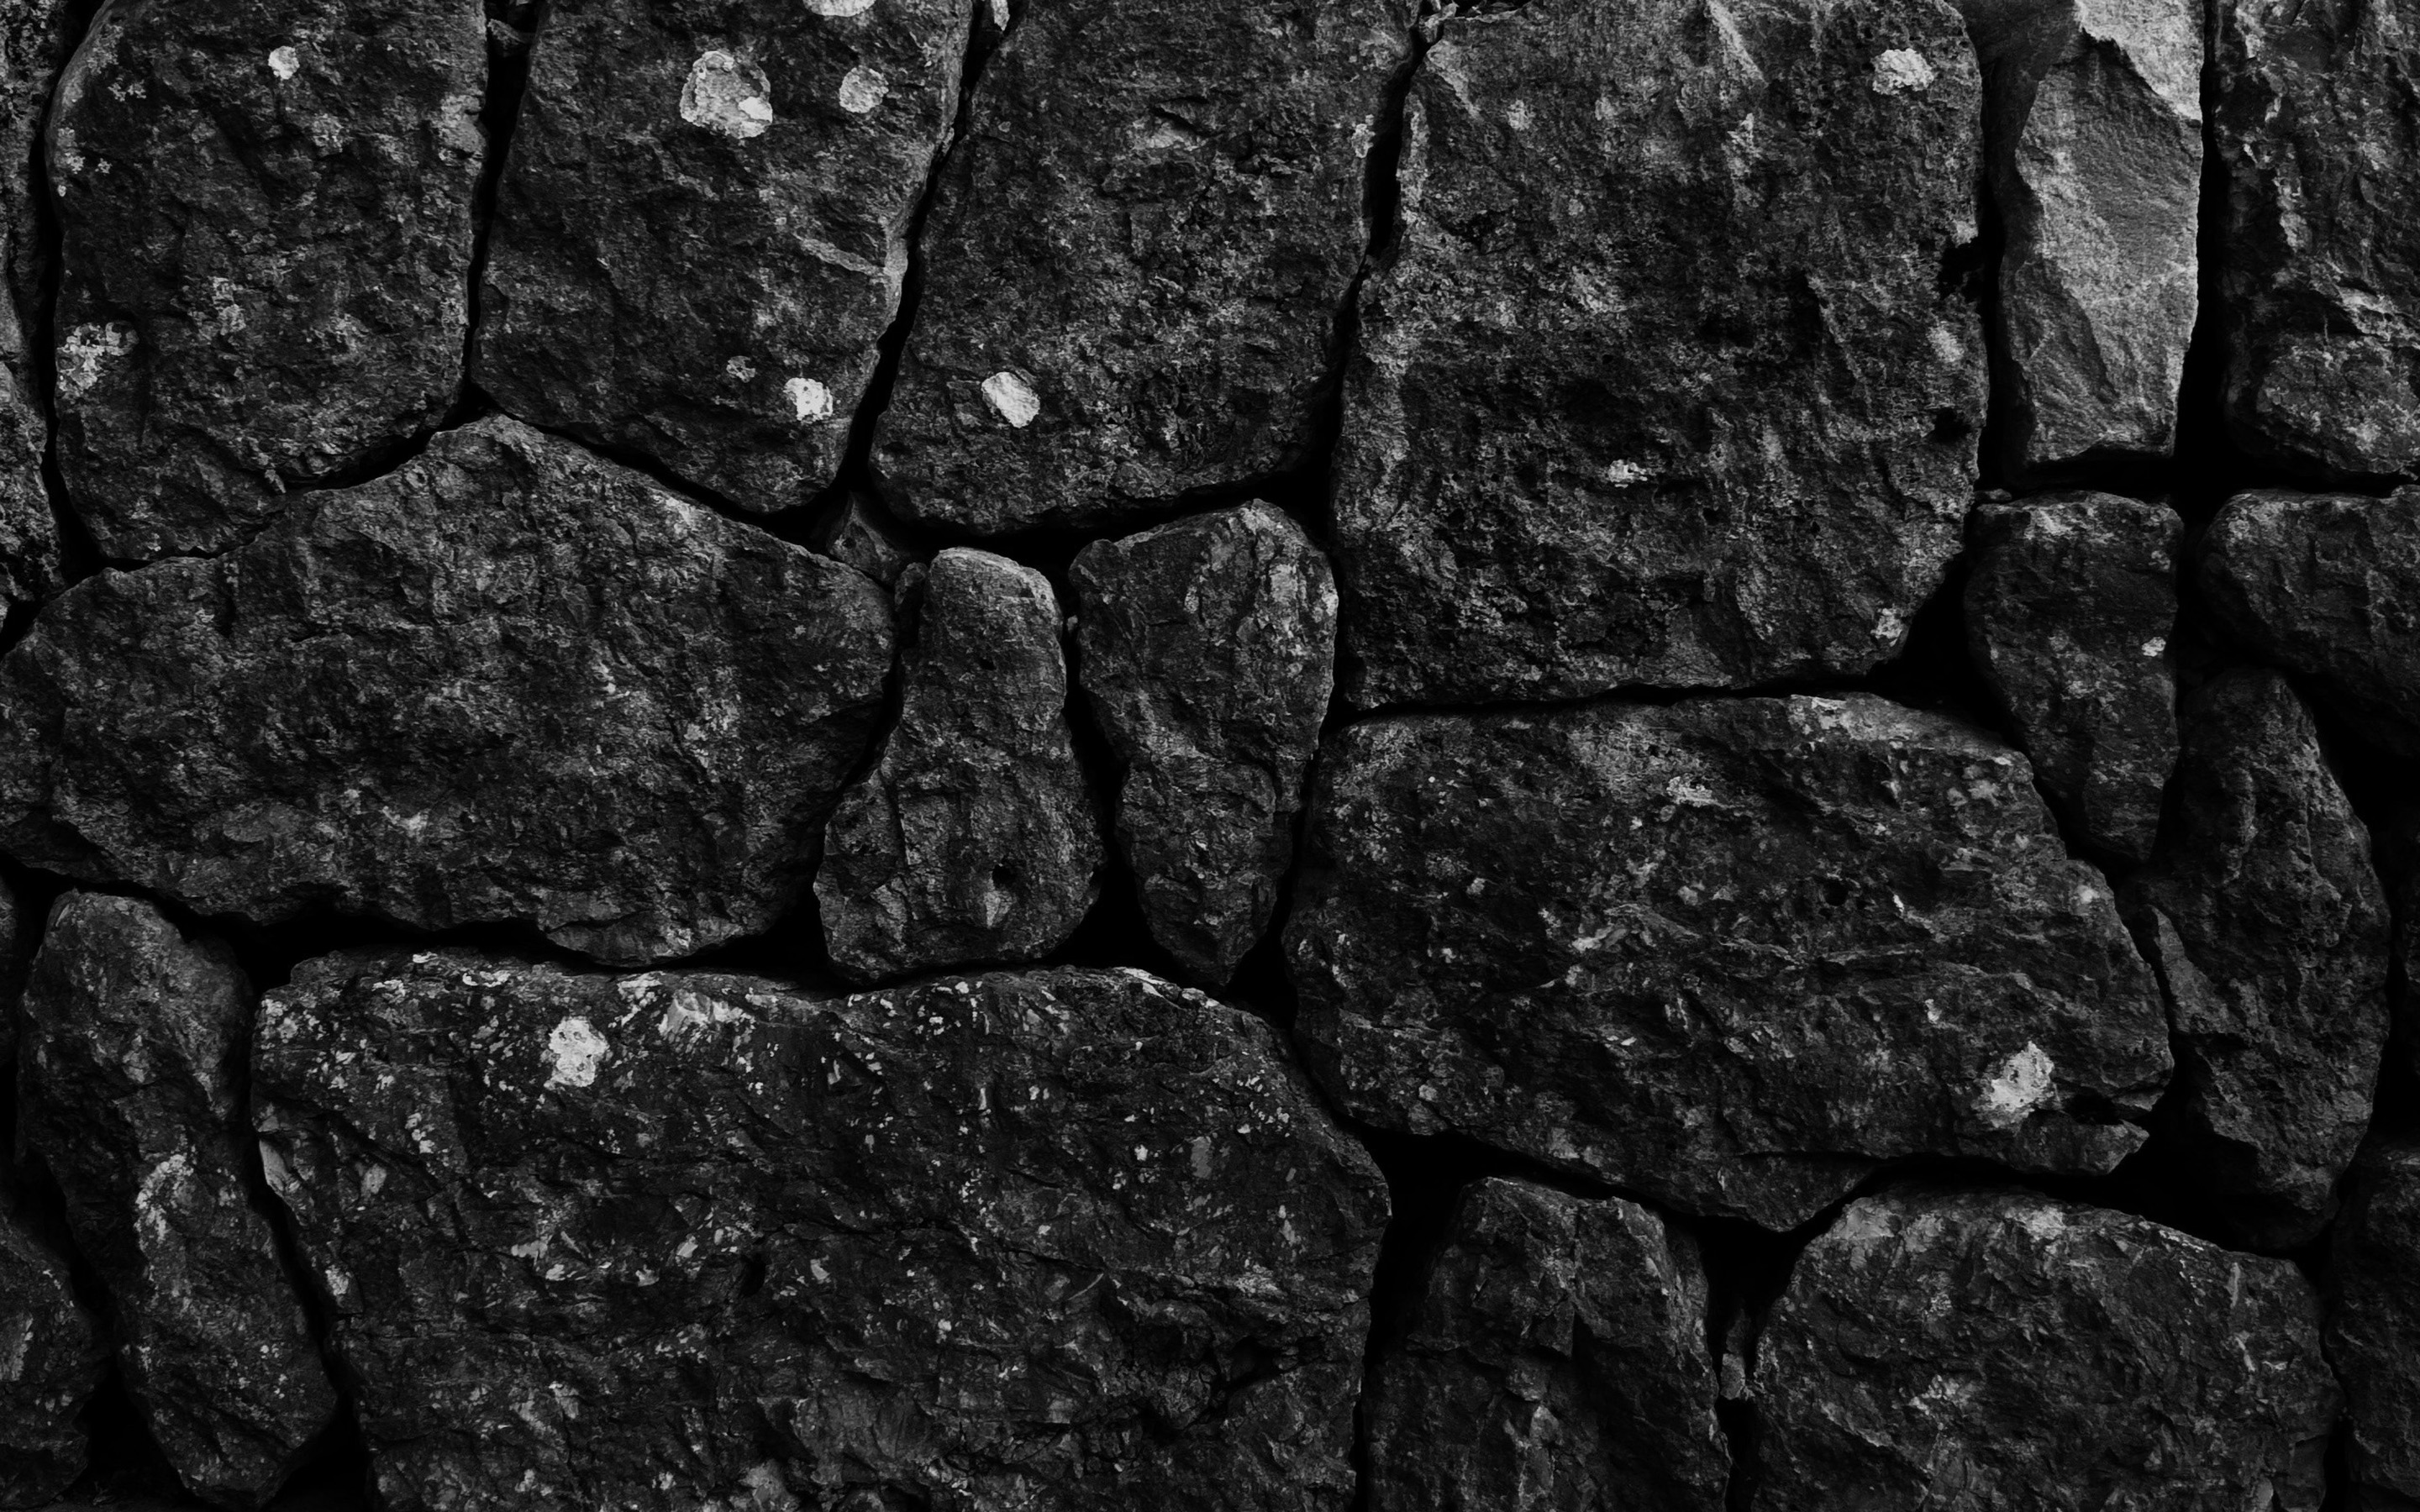 Download Wallpaper Black Stone Wall, Close Up, Natural Rock Texture, Stone Textures, Black Grunge Background, Macro, Black Stones, Stone Background, Background With Natural Rock, Black Background For Desktop With Resolution 2880x1800. High Quality